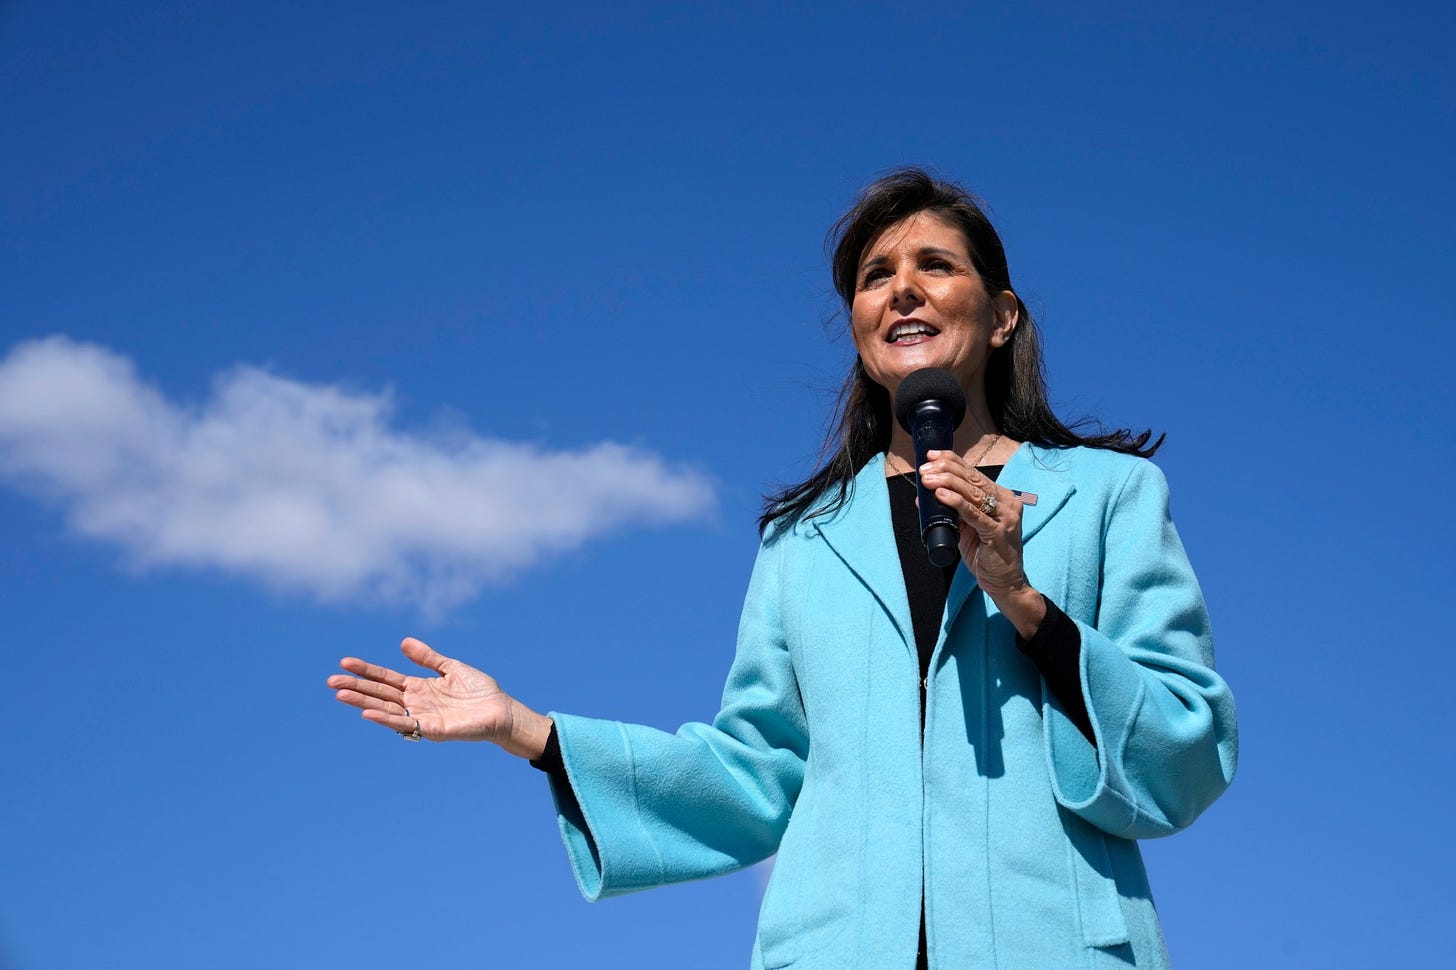 America's adversaries have reason to fear Nikki Haley | The Hill